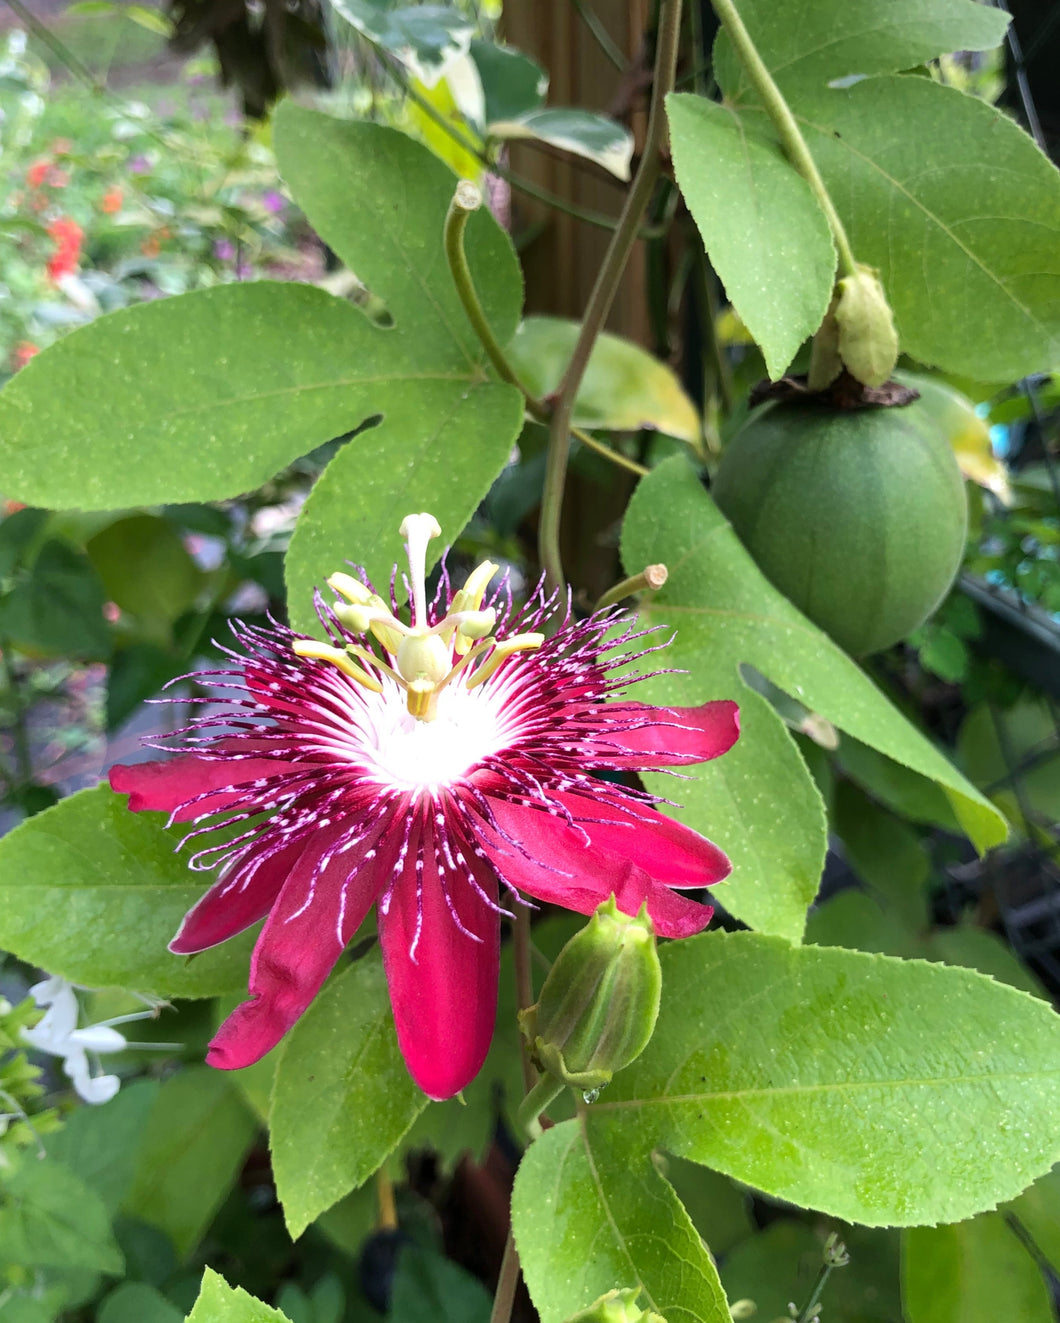 Passiflora Lady Margaret Fragrant Passion Flower Vine 3 inch potted plant Southern Flower Garden  Southern Flower Garden